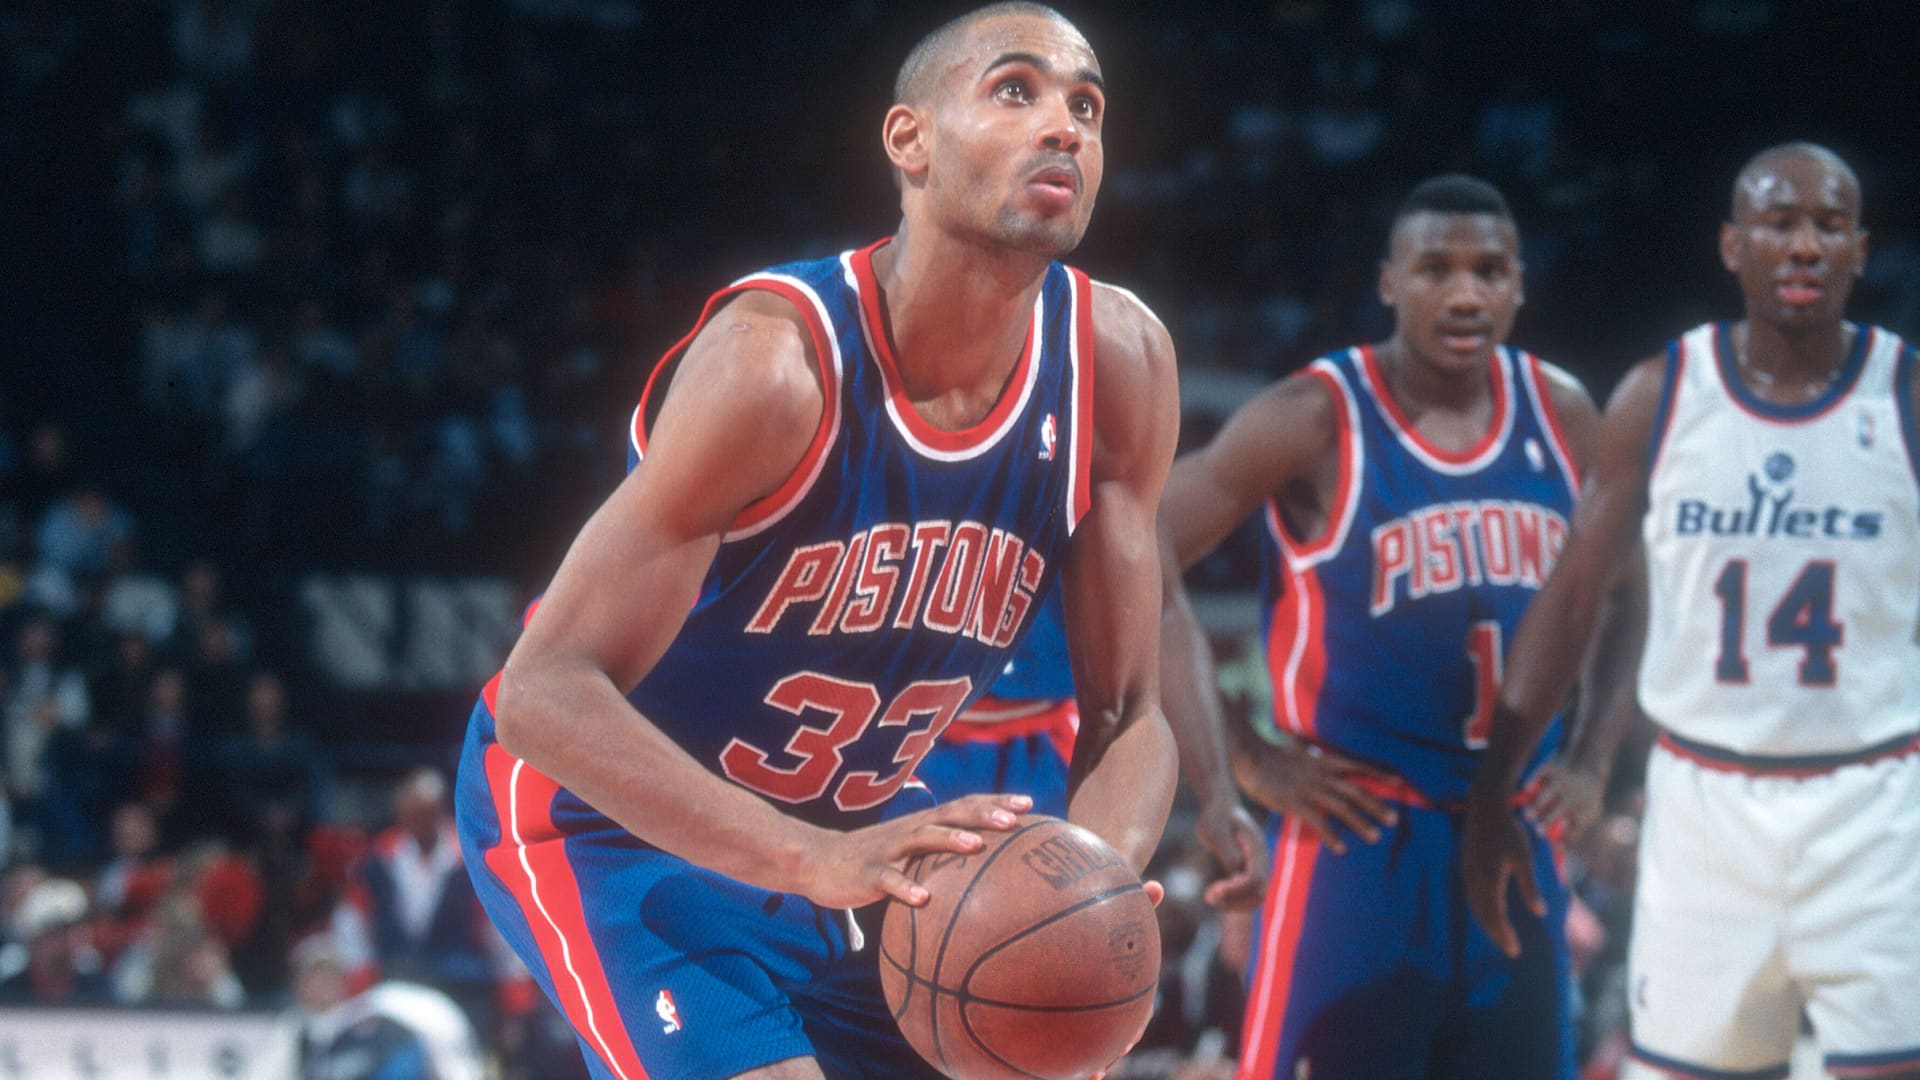 Grant Hill #33 of the Detroit Pistons stands at the line to shoot a foul shot against the Washington Bullets during an NBA basketball game circa 1994 at the US Airways Arena in Landover, Maryland. Hill played for the Pistons from 1994-2000.